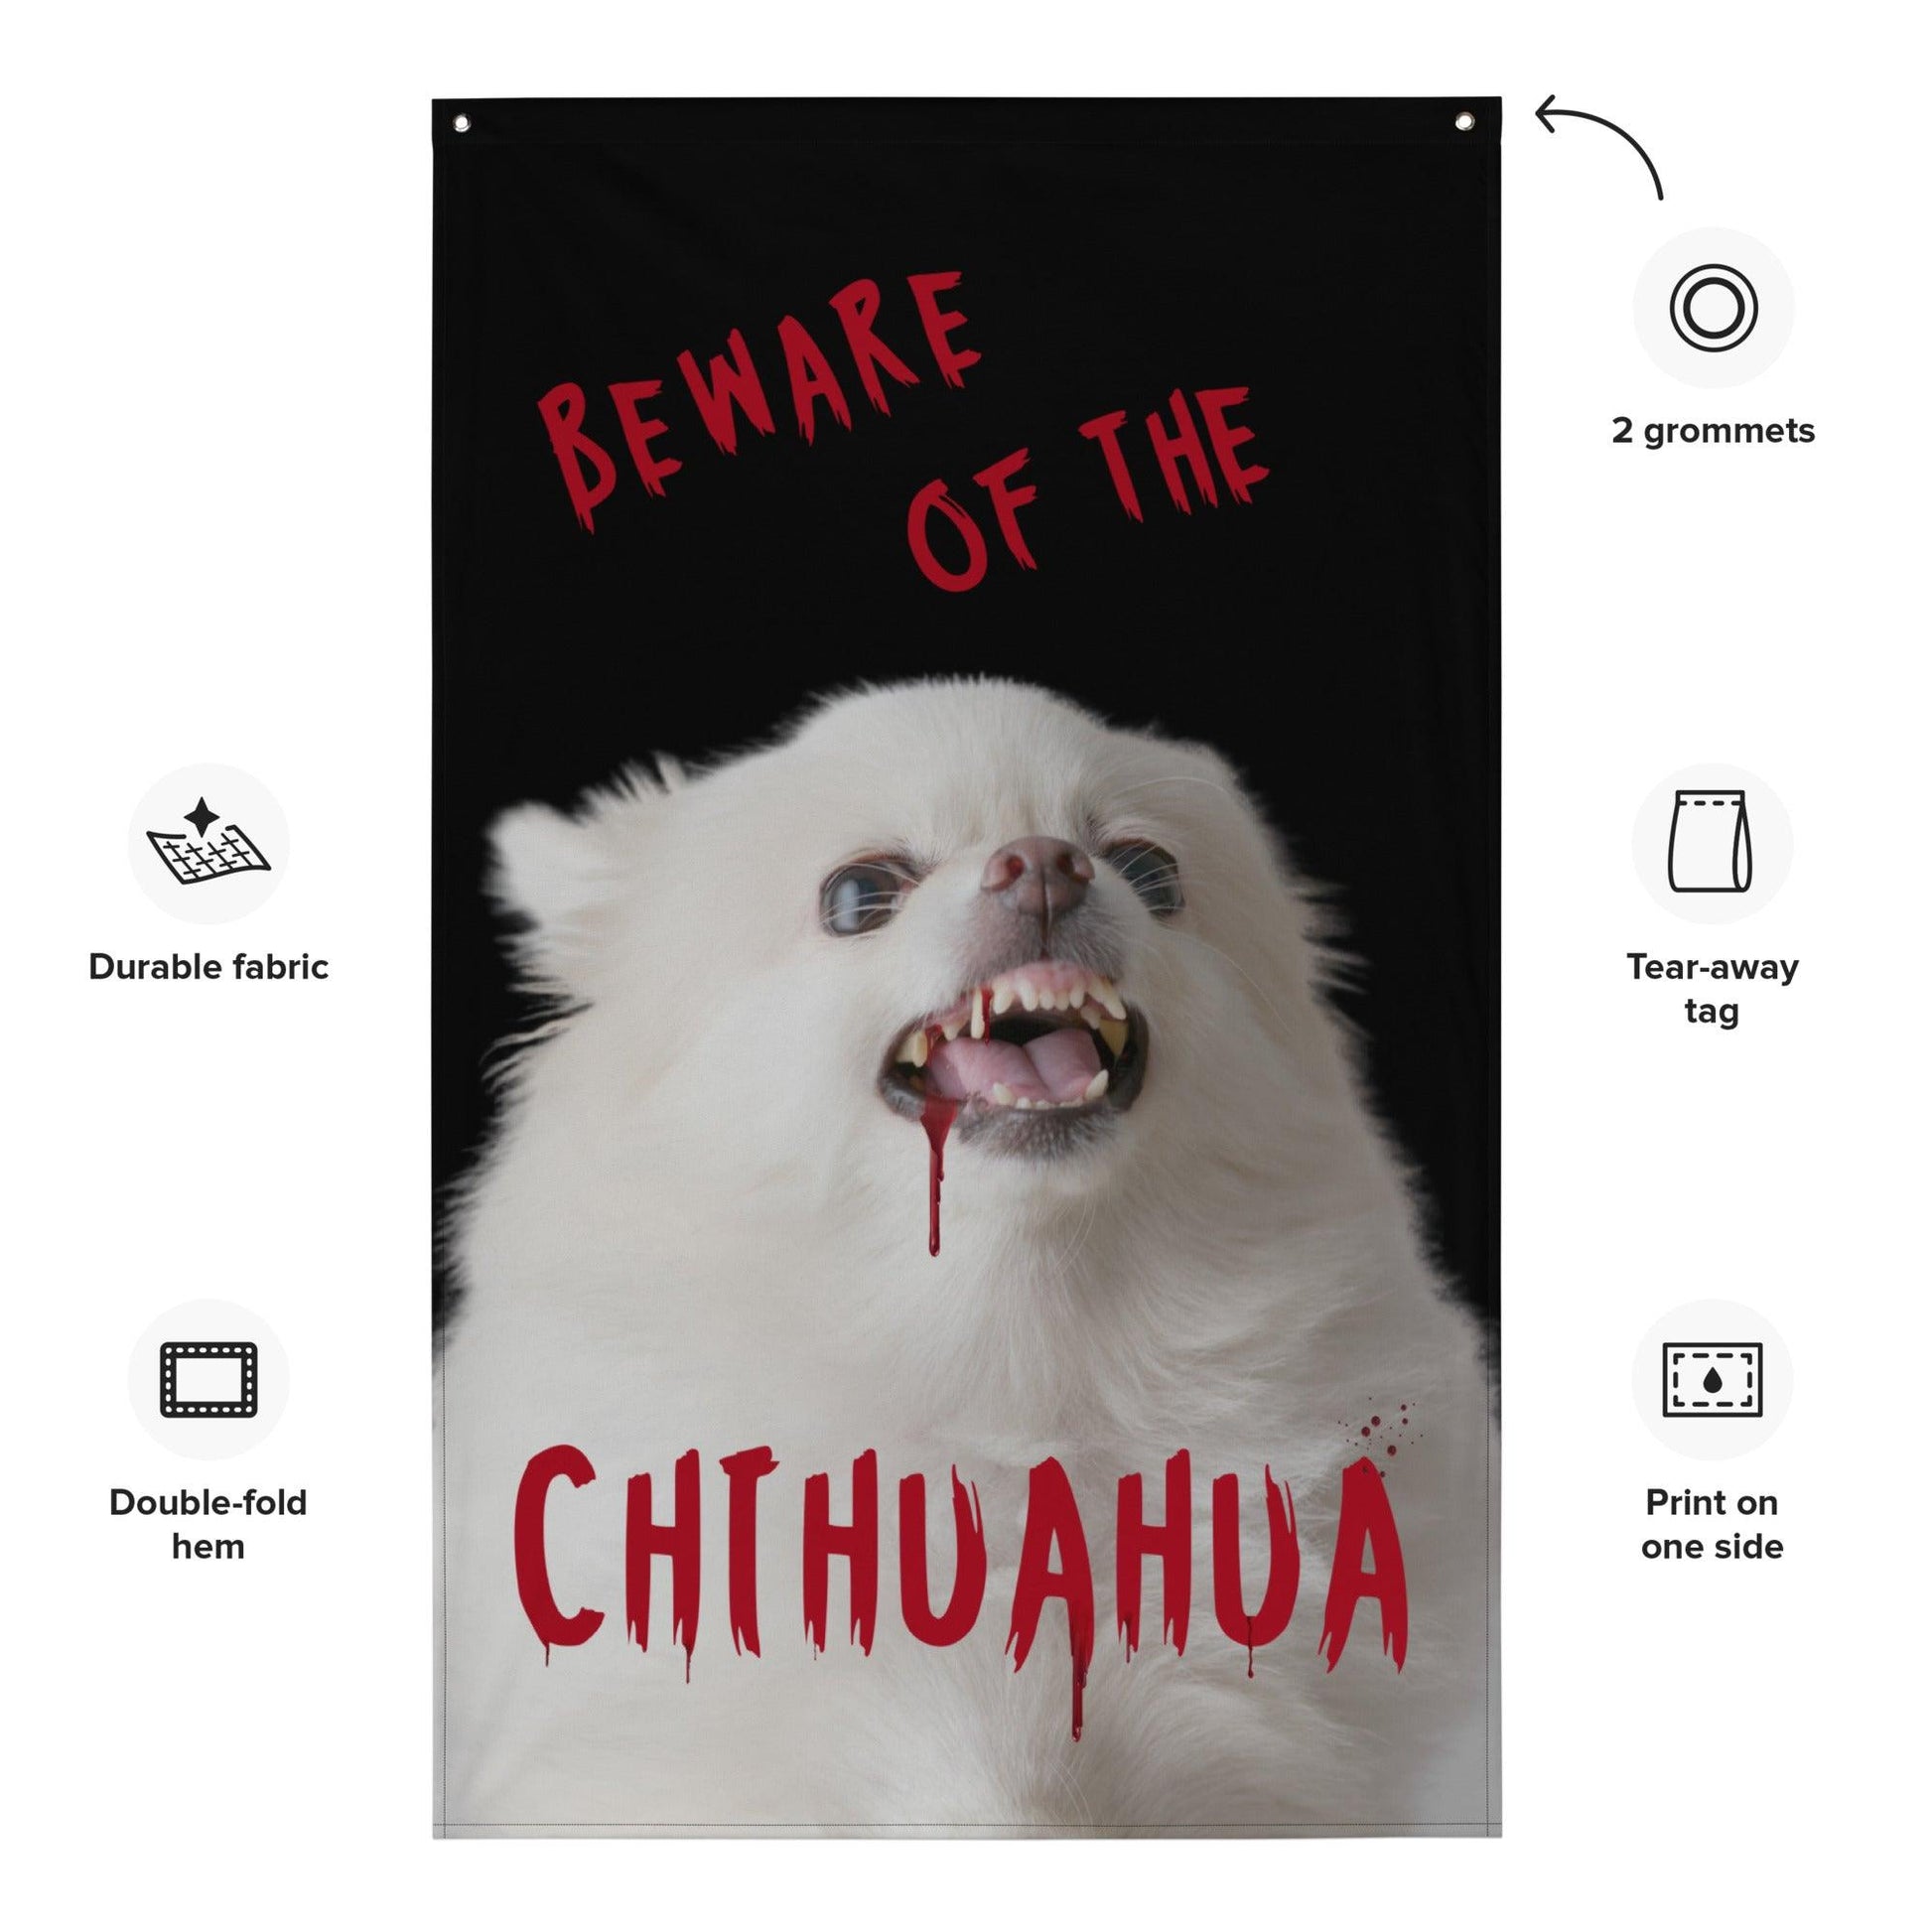 An angelic fluffy white chihuahua with bloody fangs reminds us that looks can be deceiving. Beware of the chihuahua!  This zombie chihuahua Halloween flag gives you instant Halloween vibes with minimal effort. Made well from durable knitted polyester, this flag can be folded and put away to reuse year after year. Let's stop the throw-away Halloween decor culture!